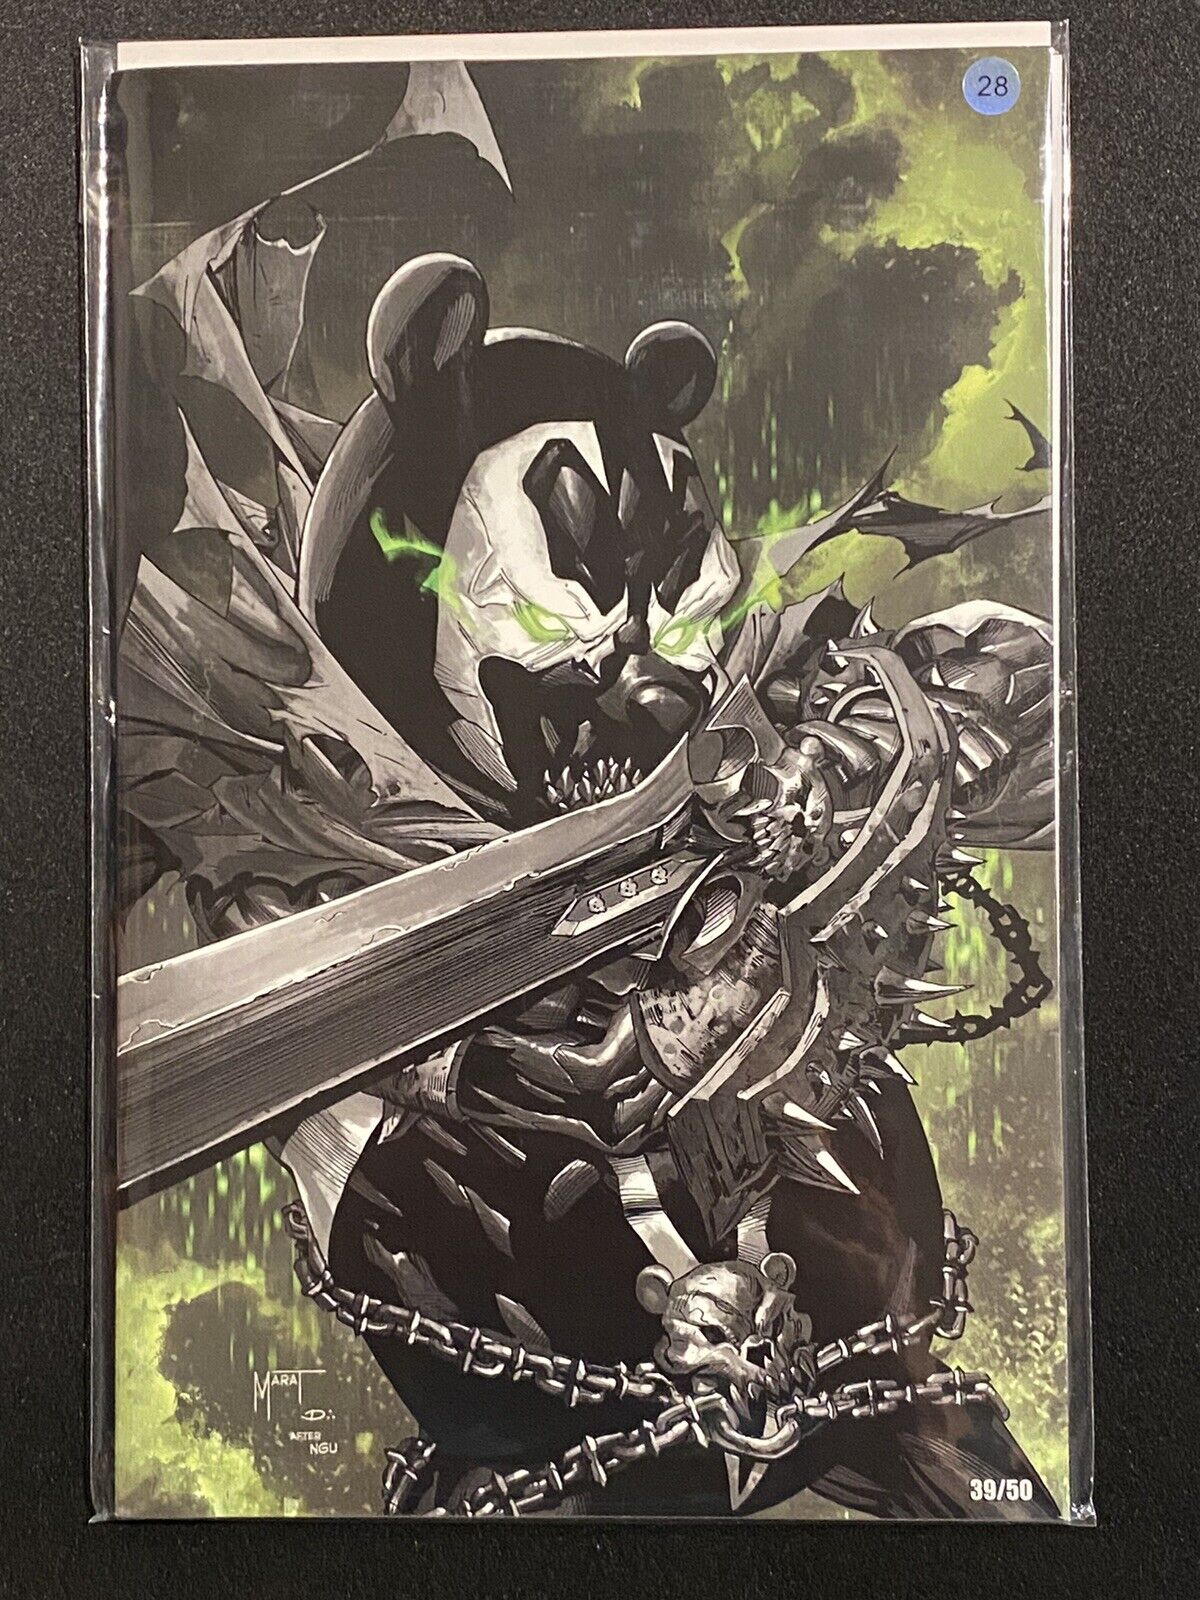 Do You Pooh - SPAWN King Pooh #2 LIMITED Clan McDonald Spawn Con Cover 39/50